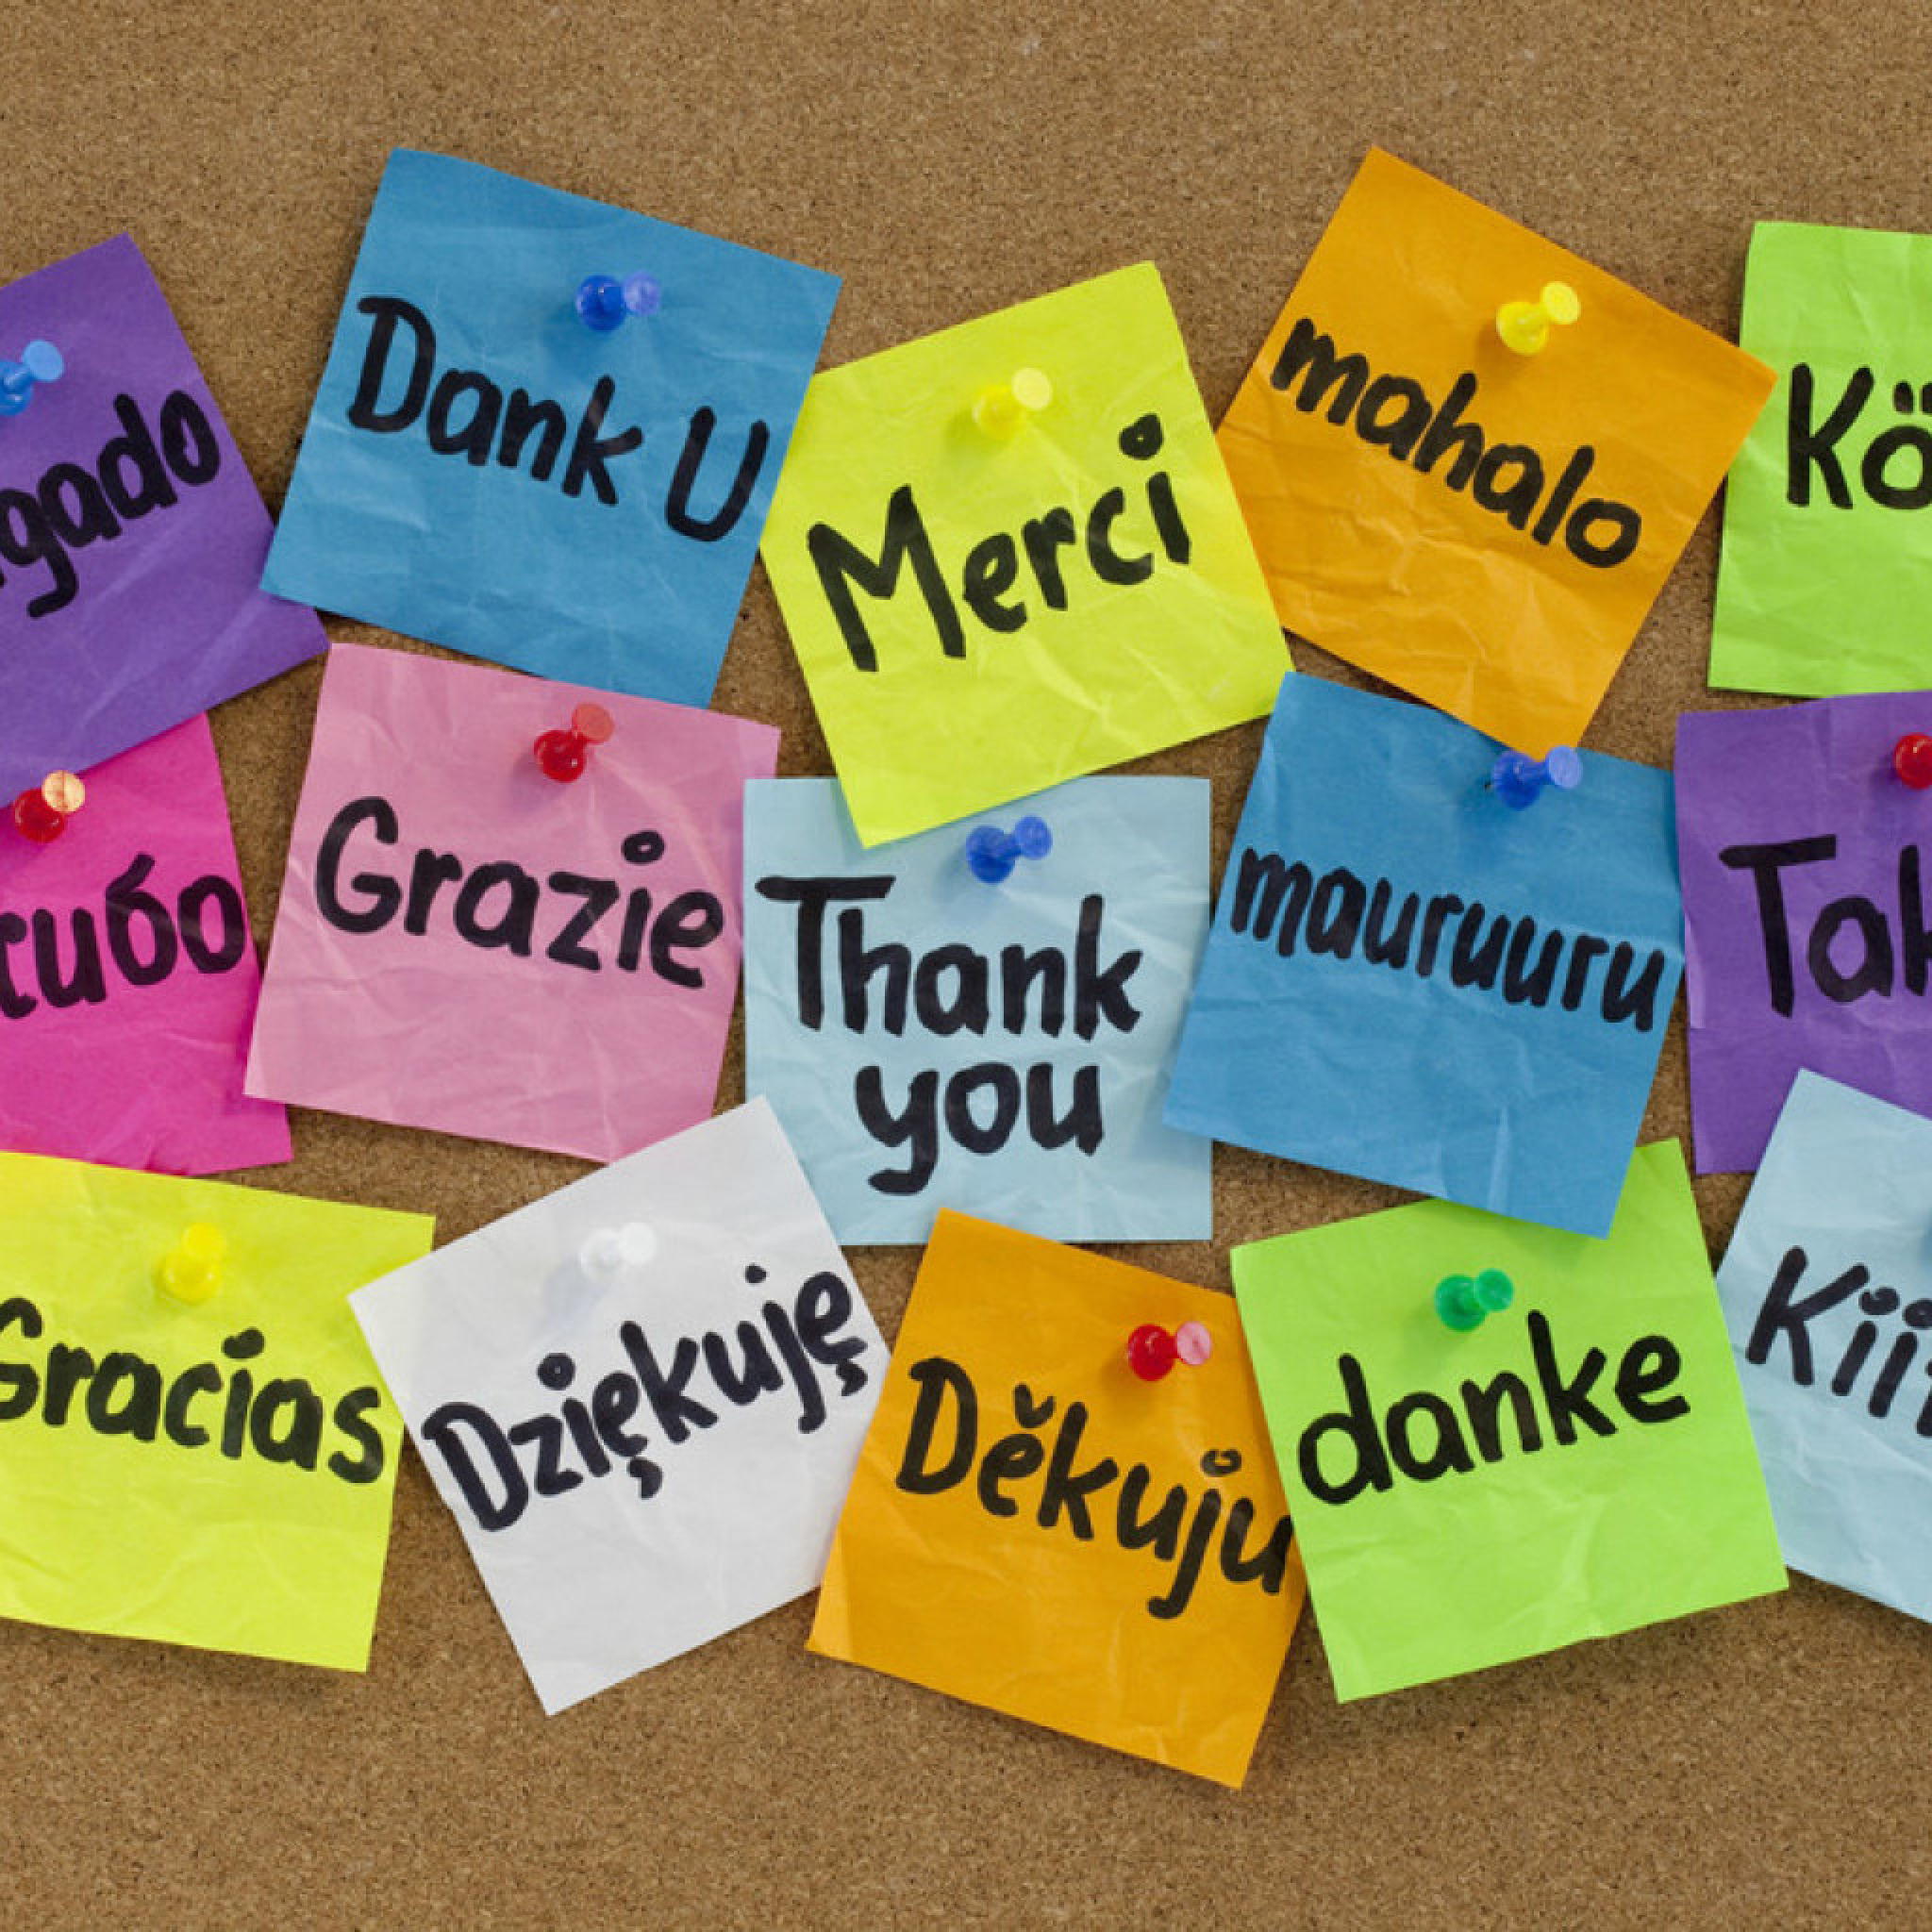 How To Say Thank You in Different Languages wallpaper 2048x2048